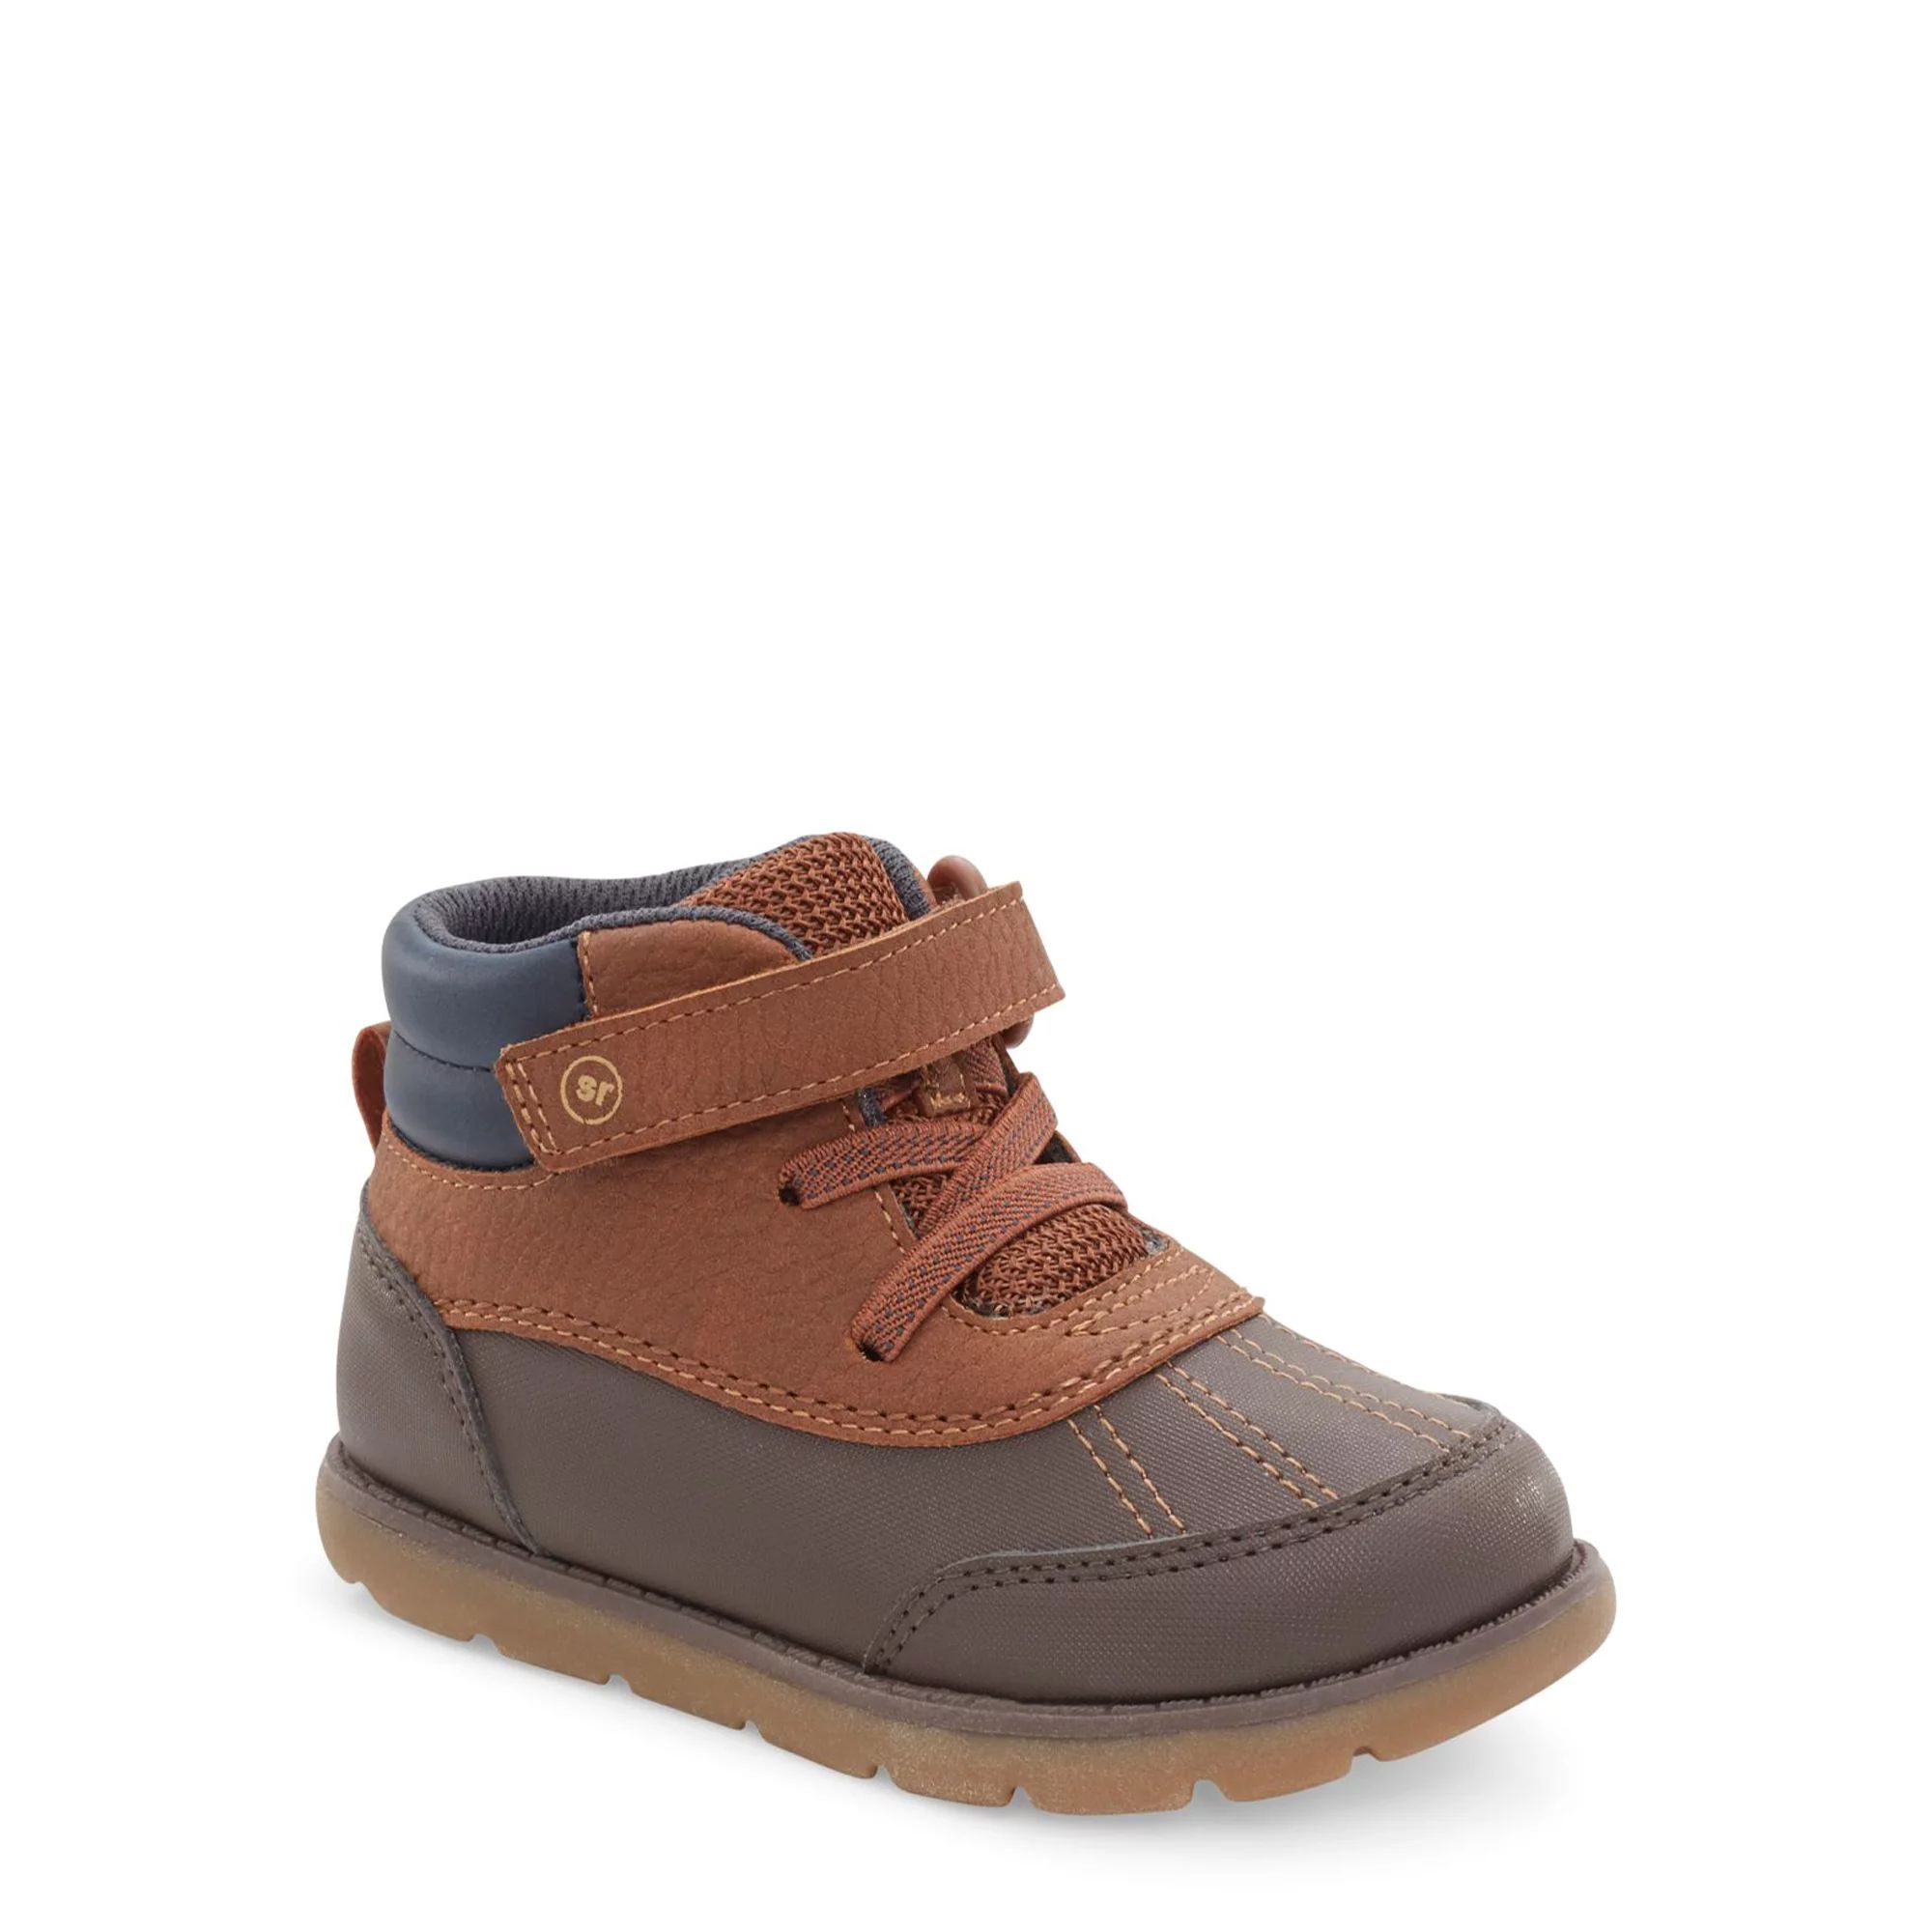 Munchkin by Stride Rite Toddler Boys Harry Brown Boots, Sizes 7-12 | Walmart (US)